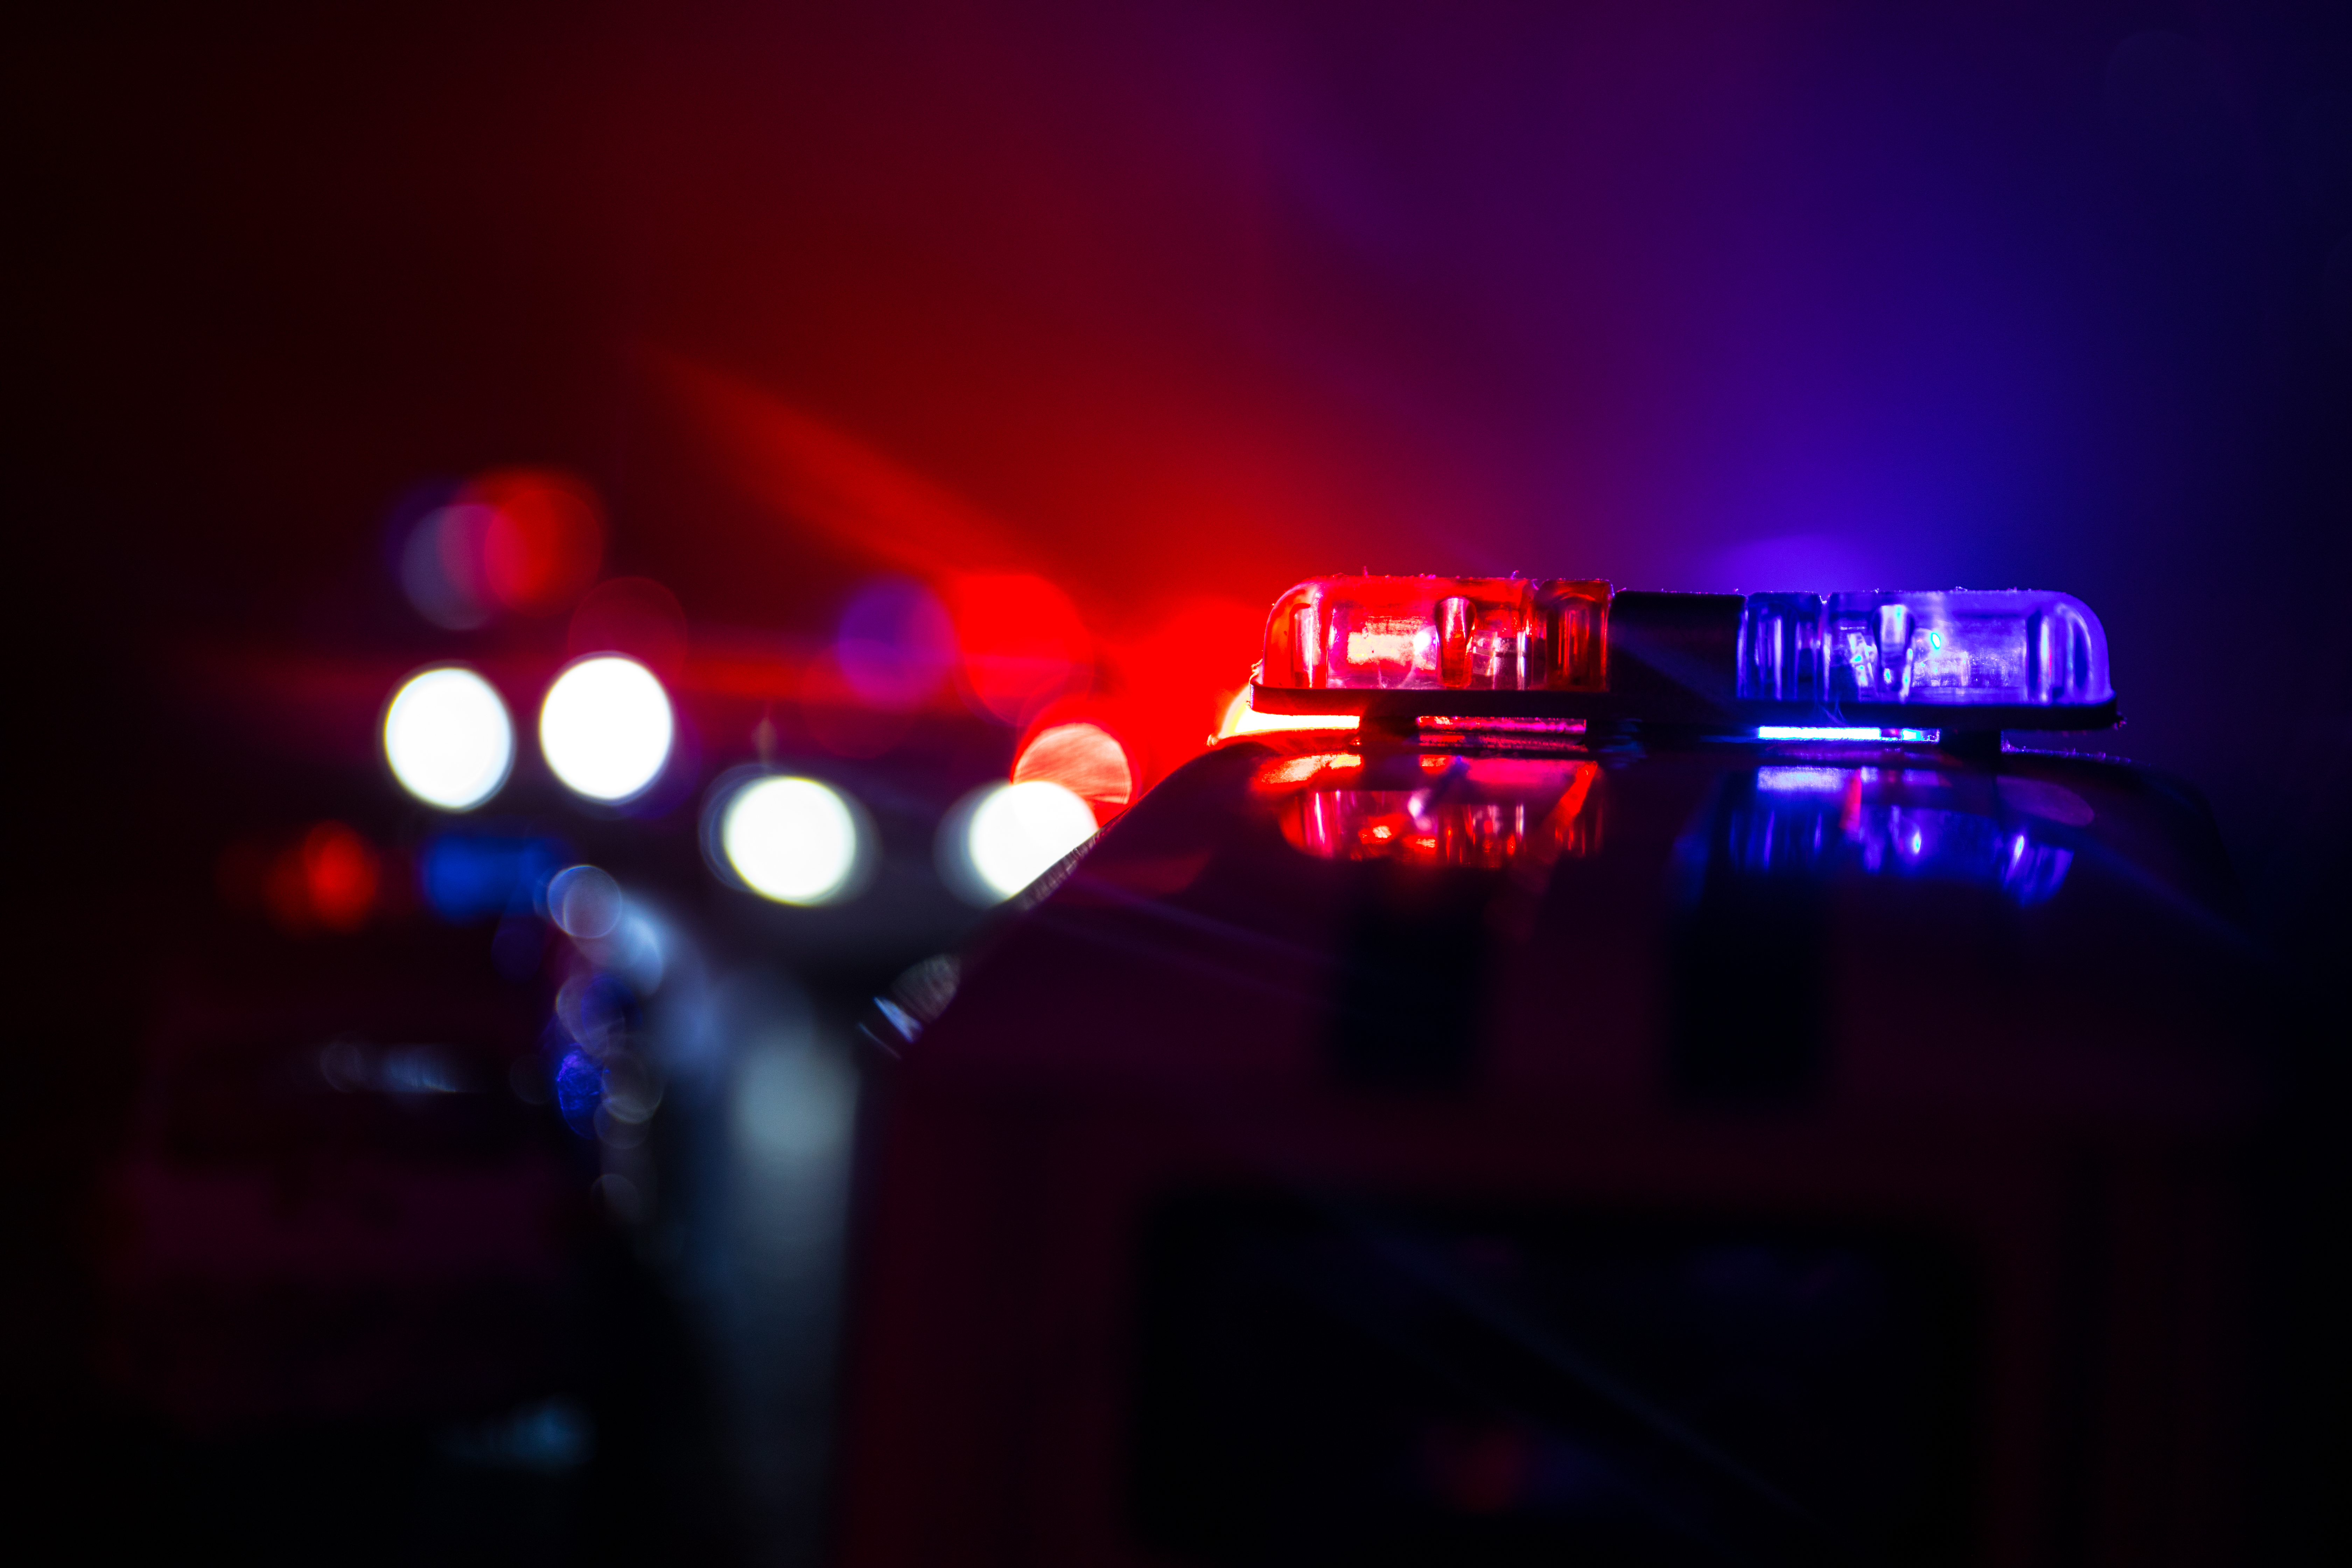 Police cars at night. Police car chasing a car at night with fog background. 911 Emergency response police car speeding to scene of crime. Selective focus | Source: Shutterstock